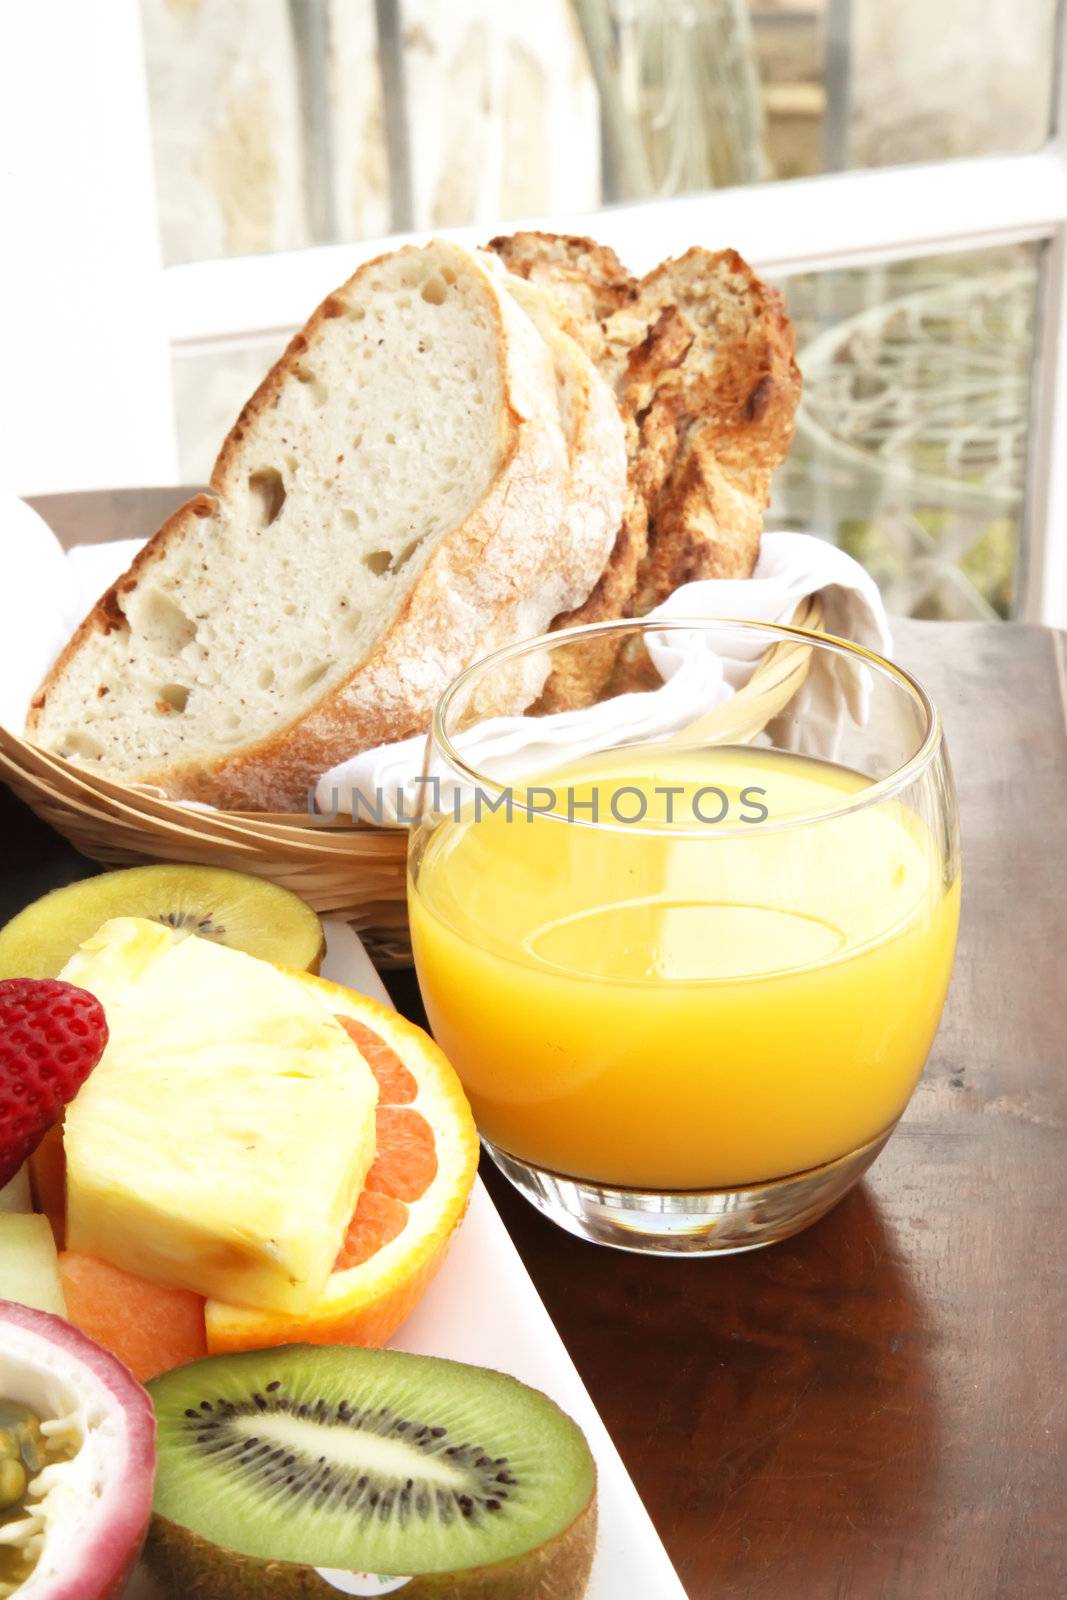 Orange Juice Cup with a Breakfast Meal